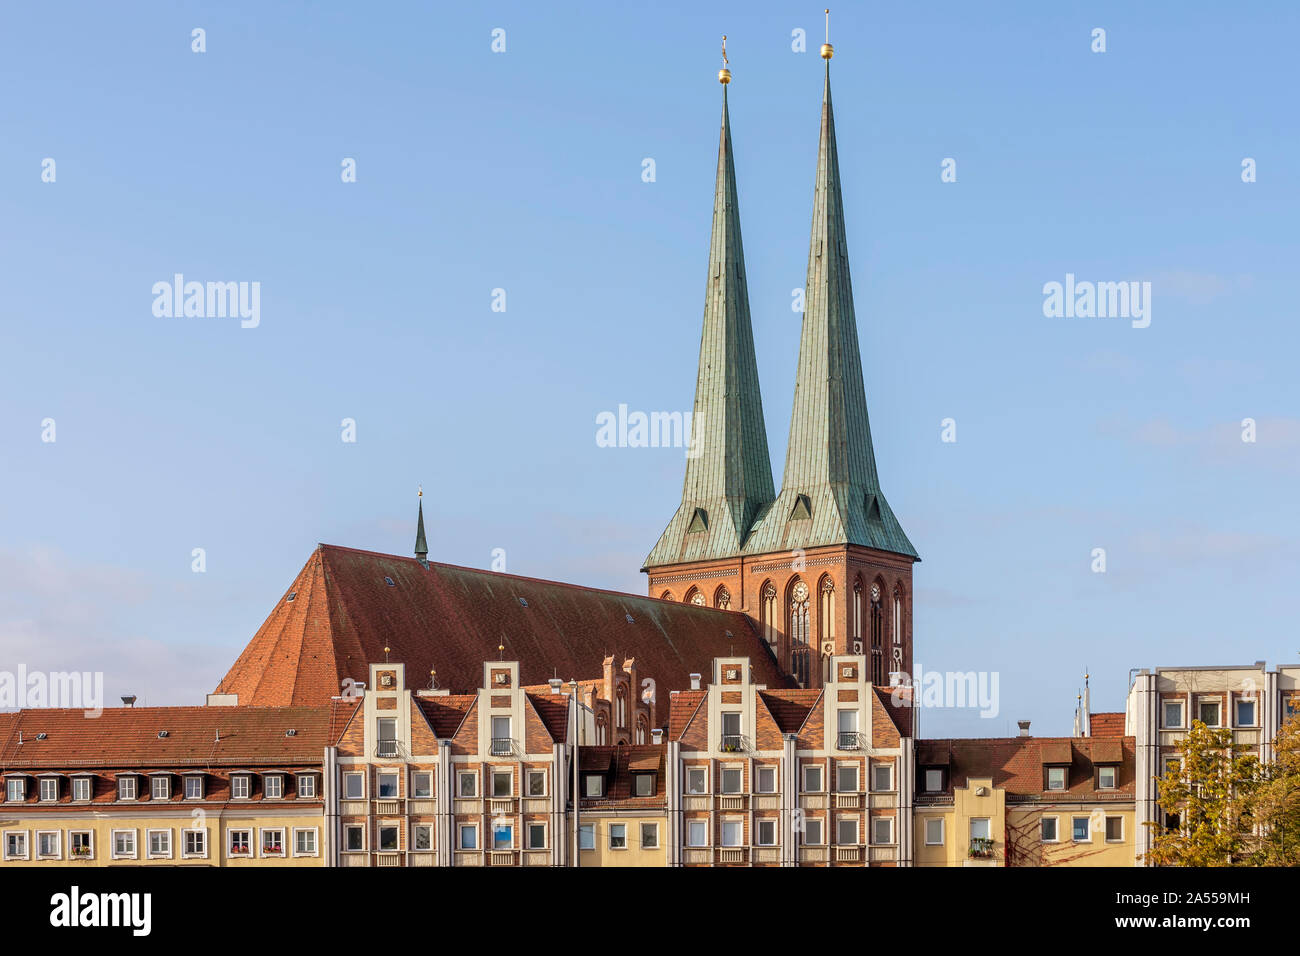 The spiers of St. Nicholas Church illuminated by morning light in the Mitte district of Berlin, Germany Stock Photo